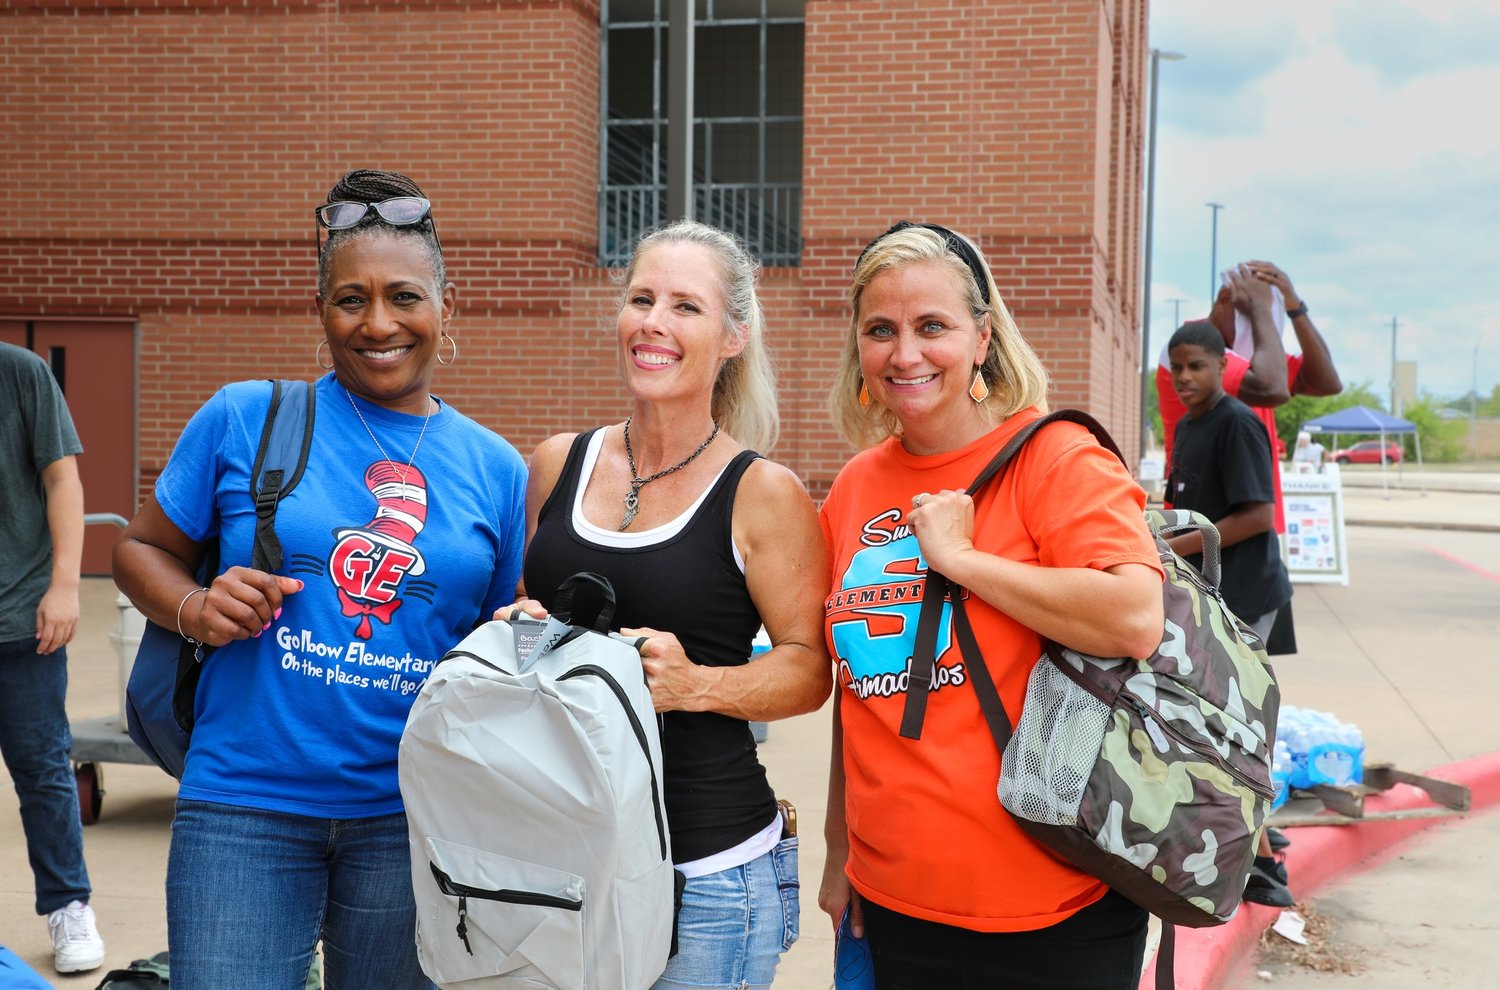 Compassion Katy held its annual Operation Back 2 School event Saturday at the Merrell Center. The event provides backpacks and school supplies to over 1,500 students at the 18 Katy ISD Title I schools.